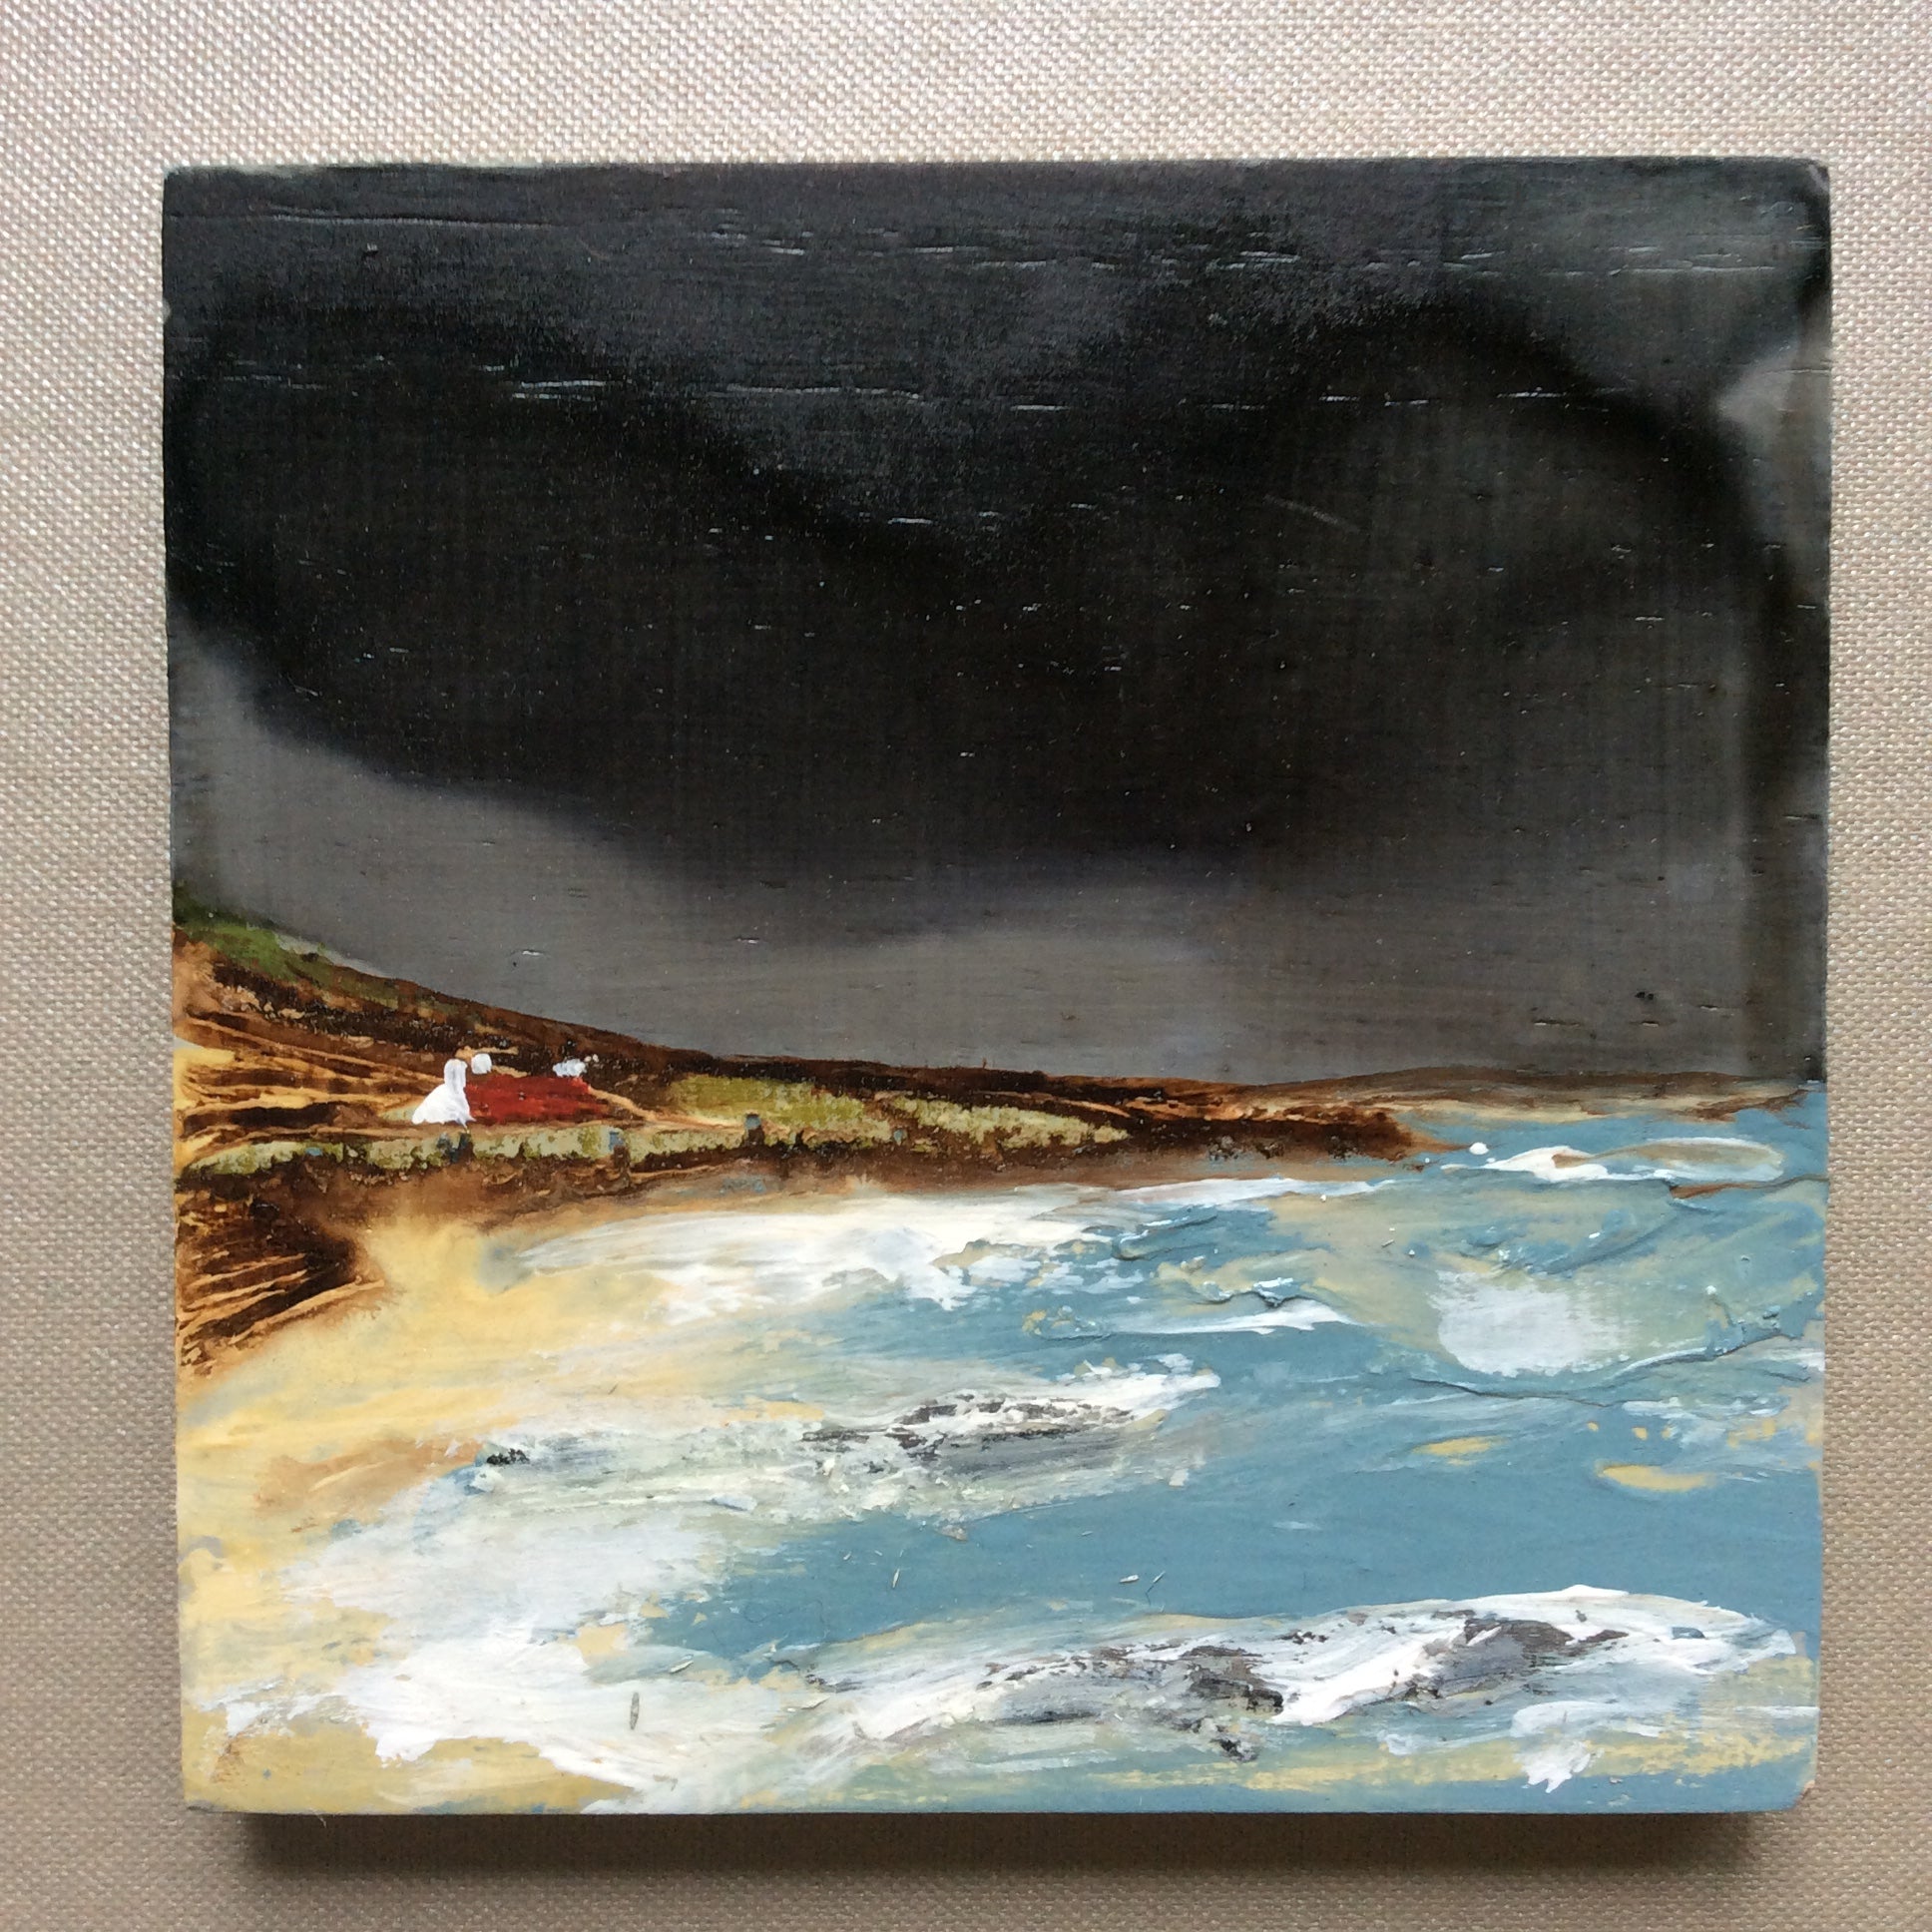 Mixed Media Art on wood By Louise O'Hara - "Storm swell”